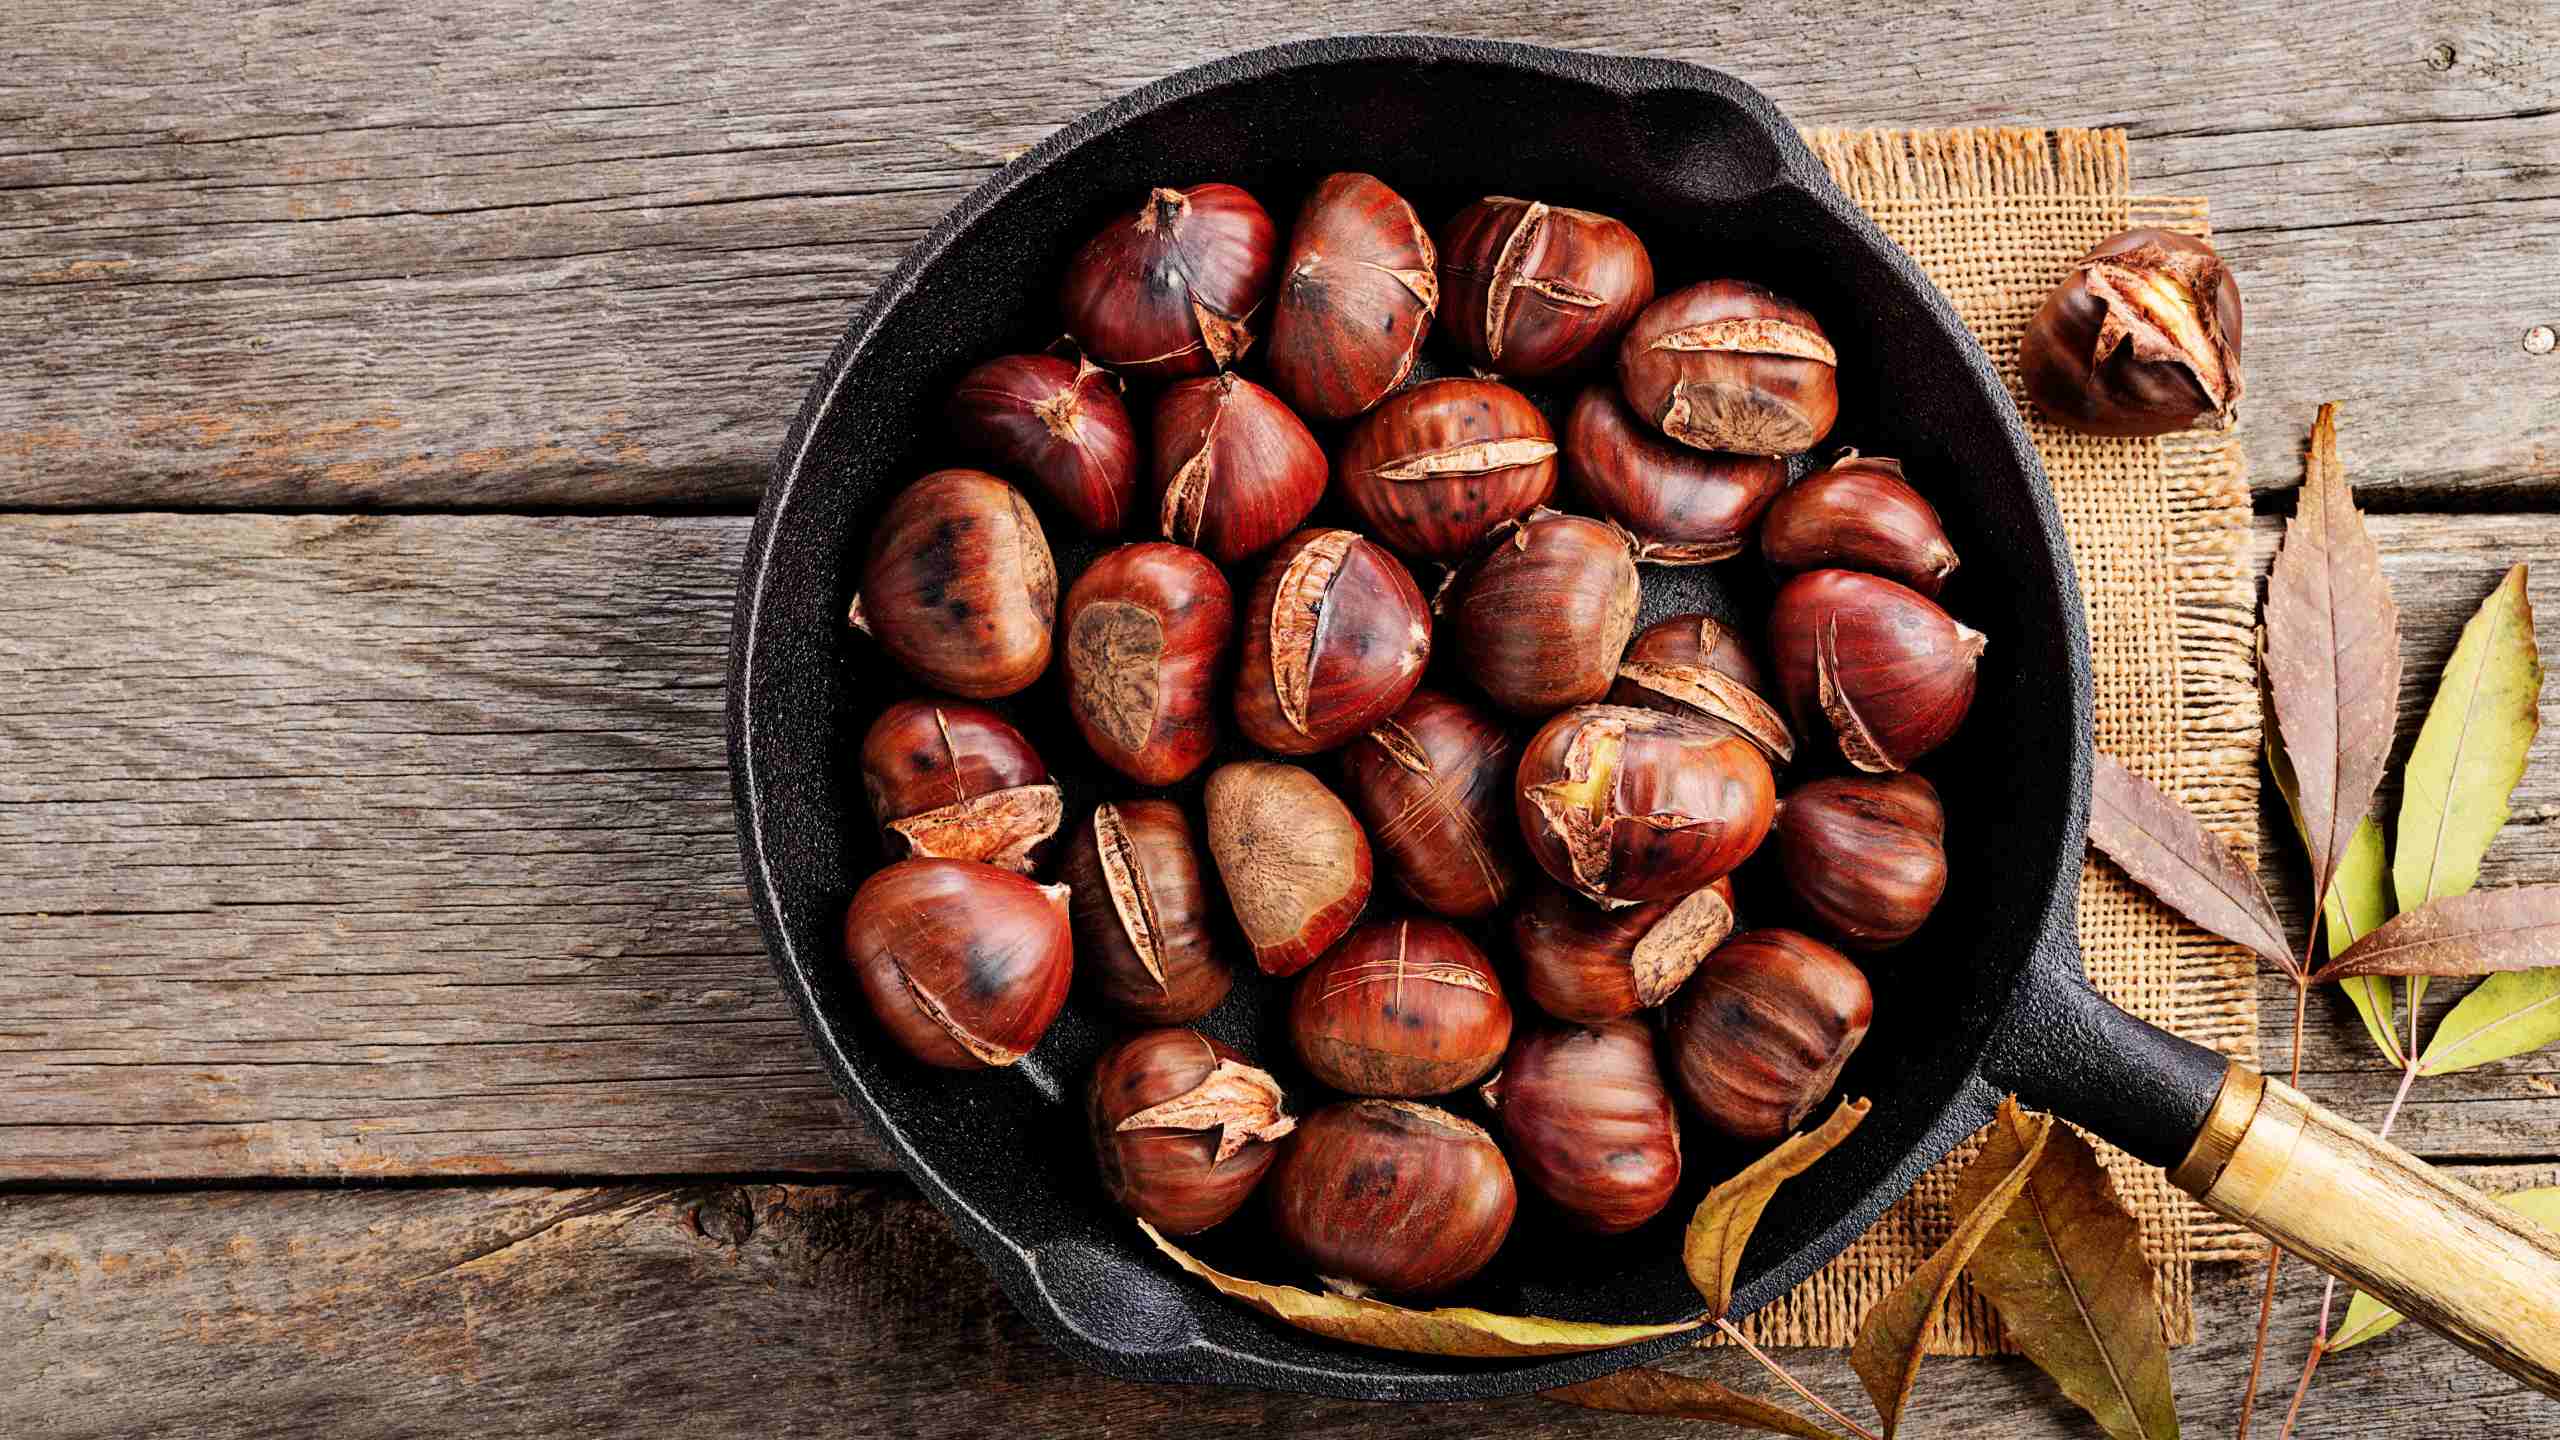 Chestnuts roasted in a cast iron frying-pan, over a burlap cloth, in a wooden table.